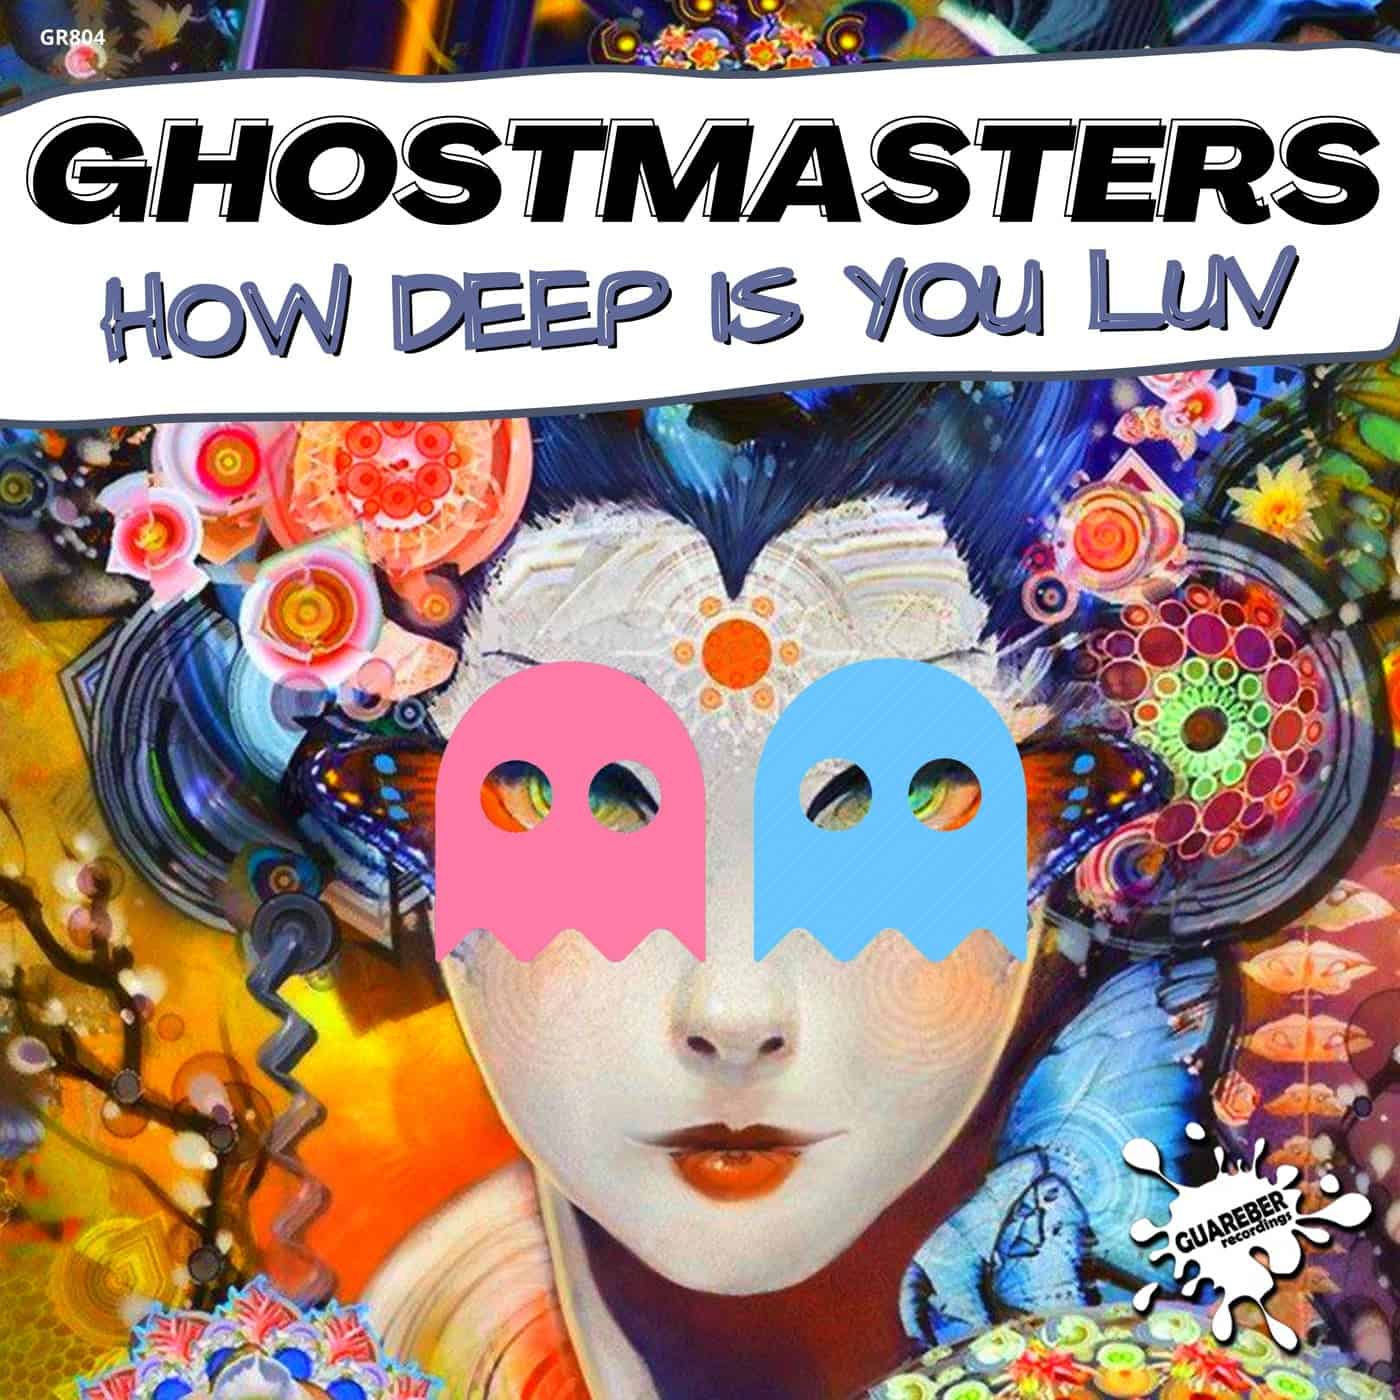 image cover: GhostMasters - How Deep Is Your Luv / GR804